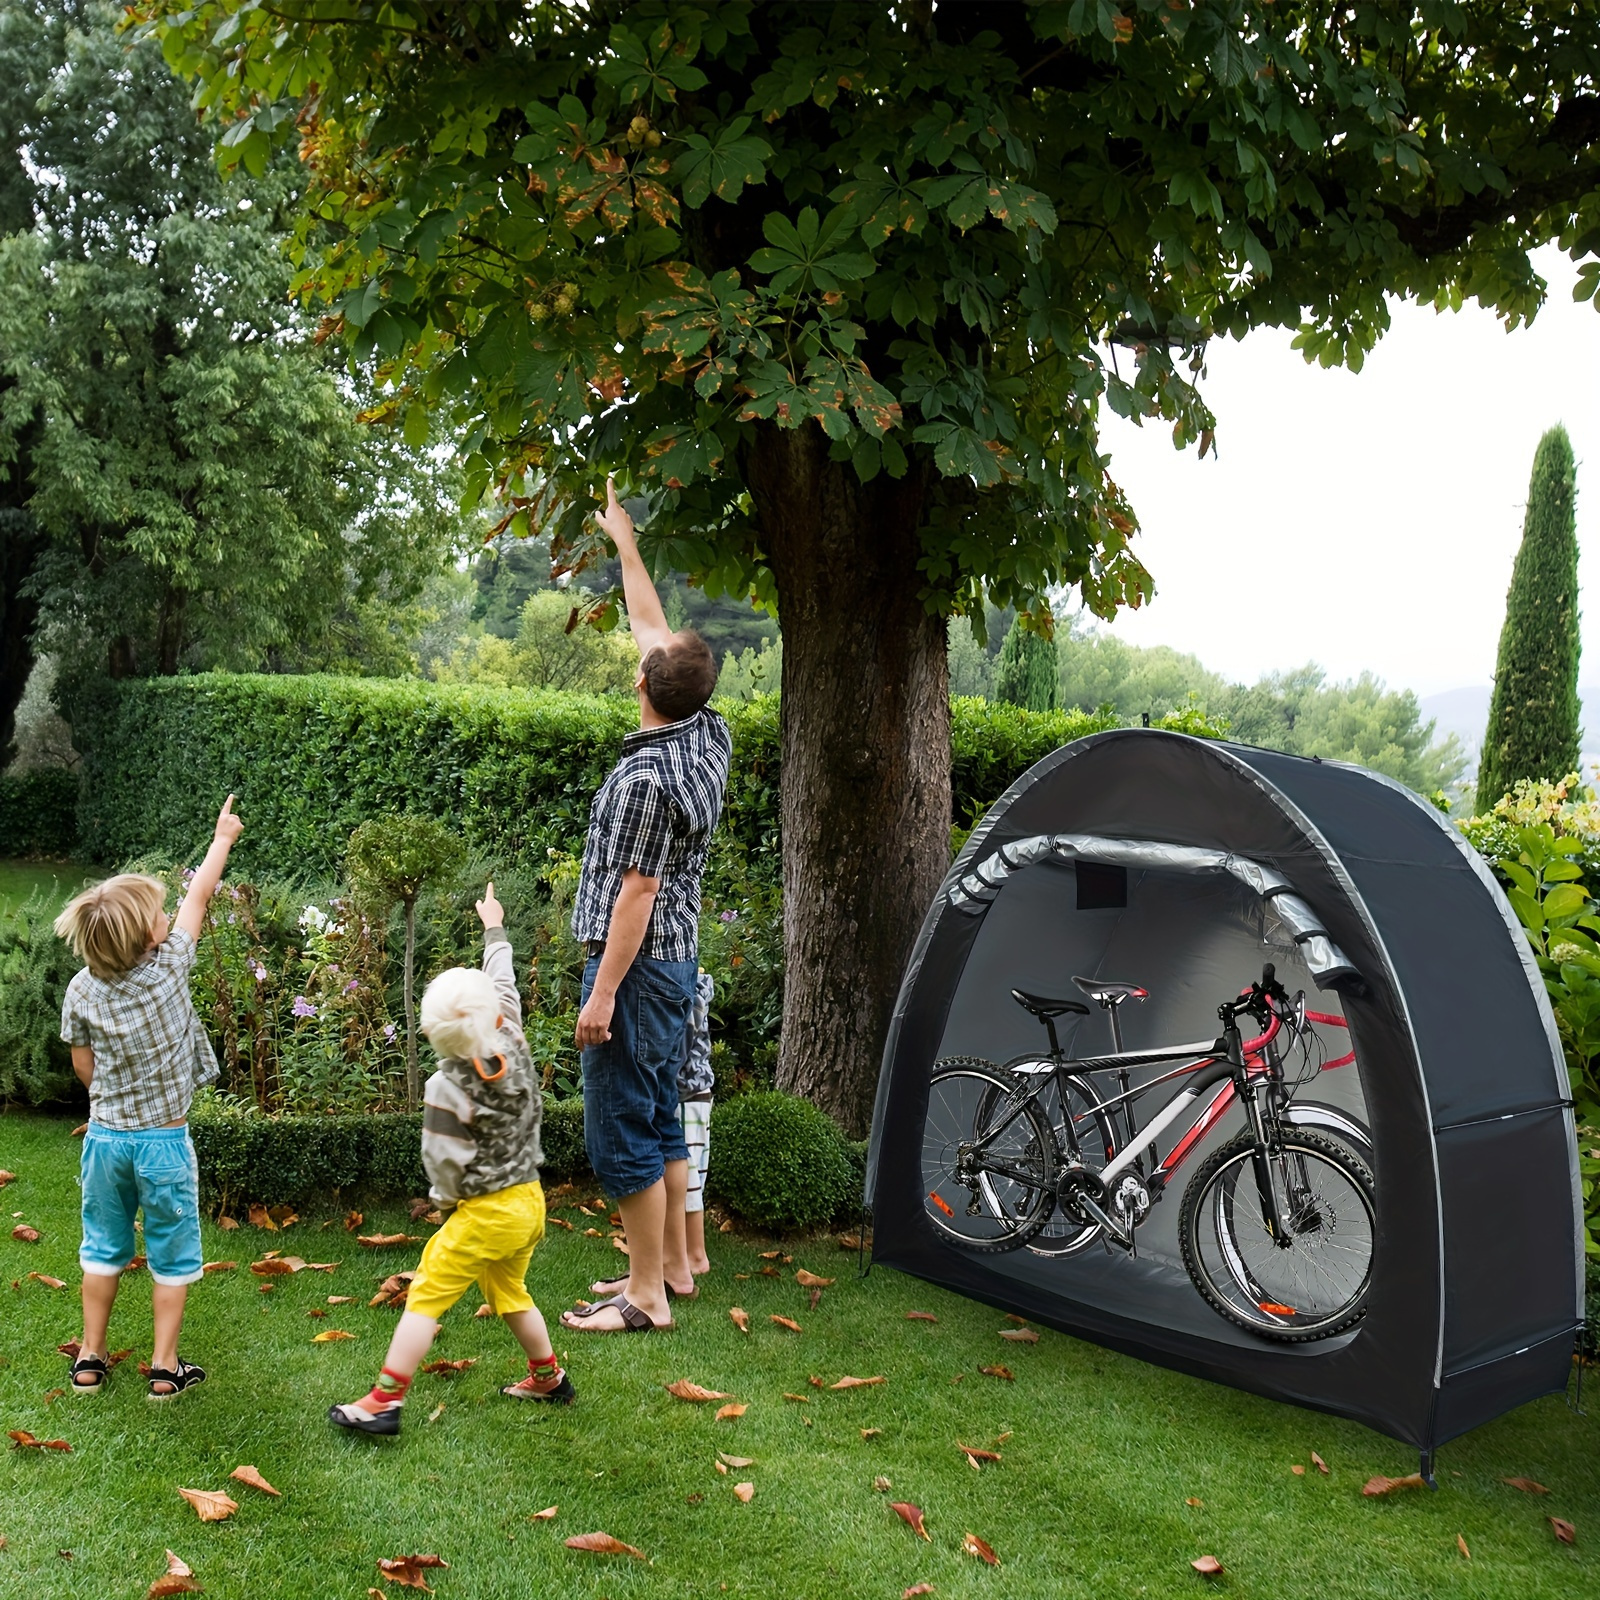 

Bike Storage Shed Tent For 2-3 Bikes Pu4000, Waterproof Anti-dust 210d Oxford Fabric Portable Foldable Outdoor Bicycle Cover Shelter, Suitable For Home, Garden